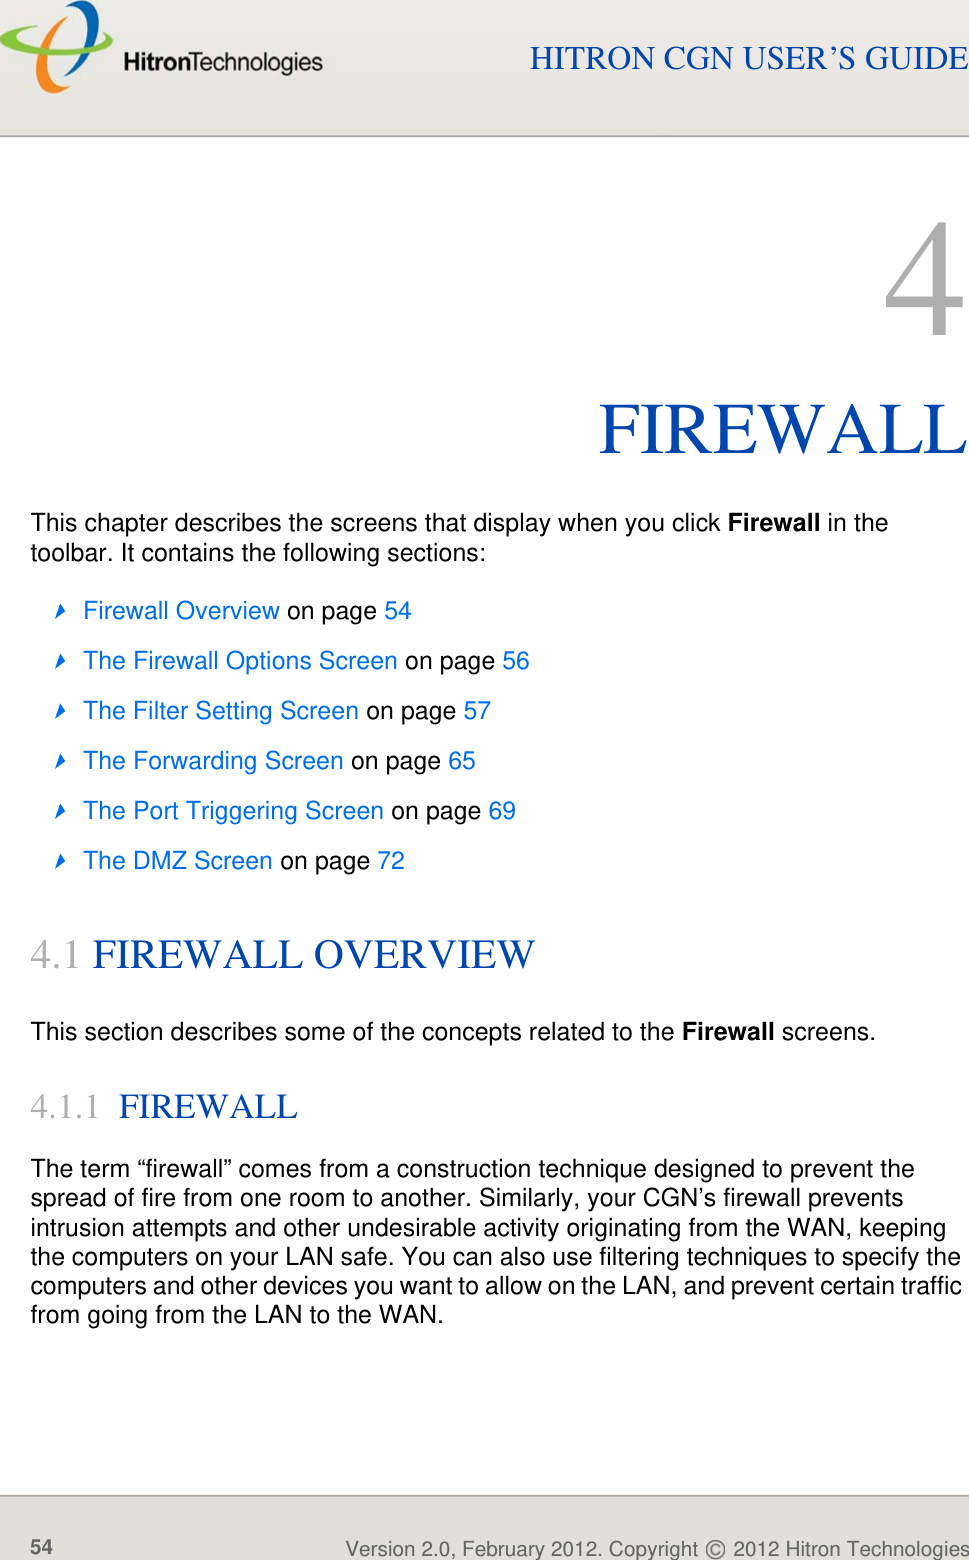 FIREWALLVersion 2.0, February 2012. Copyright   2012 Hitron Technologies54HITRON CGN USER’S GUIDE4FIREWALLThis chapter describes the screens that display when you click Firewall in the toolbar. It contains the following sections:Firewall Overview on page 54The Firewall Options Screen on page 56The Filter Setting Screen on page 57The Forwarding Screen on page 65The Port Triggering Screen on page 69The DMZ Screen on page 724.1 FIREWALL OVERVIEWThis section describes some of the concepts related to the Firewall screens.4.1.1  FIREWALLThe term “firewall” comes from a construction technique designed to prevent the spread of fire from one room to another. Similarly, your CGN’s firewall prevents intrusion attempts and other undesirable activity originating from the WAN, keeping the computers on your LAN safe. You can also use filtering techniques to specify the computers and other devices you want to allow on the LAN, and prevent certain traffic from going from the LAN to the WAN.